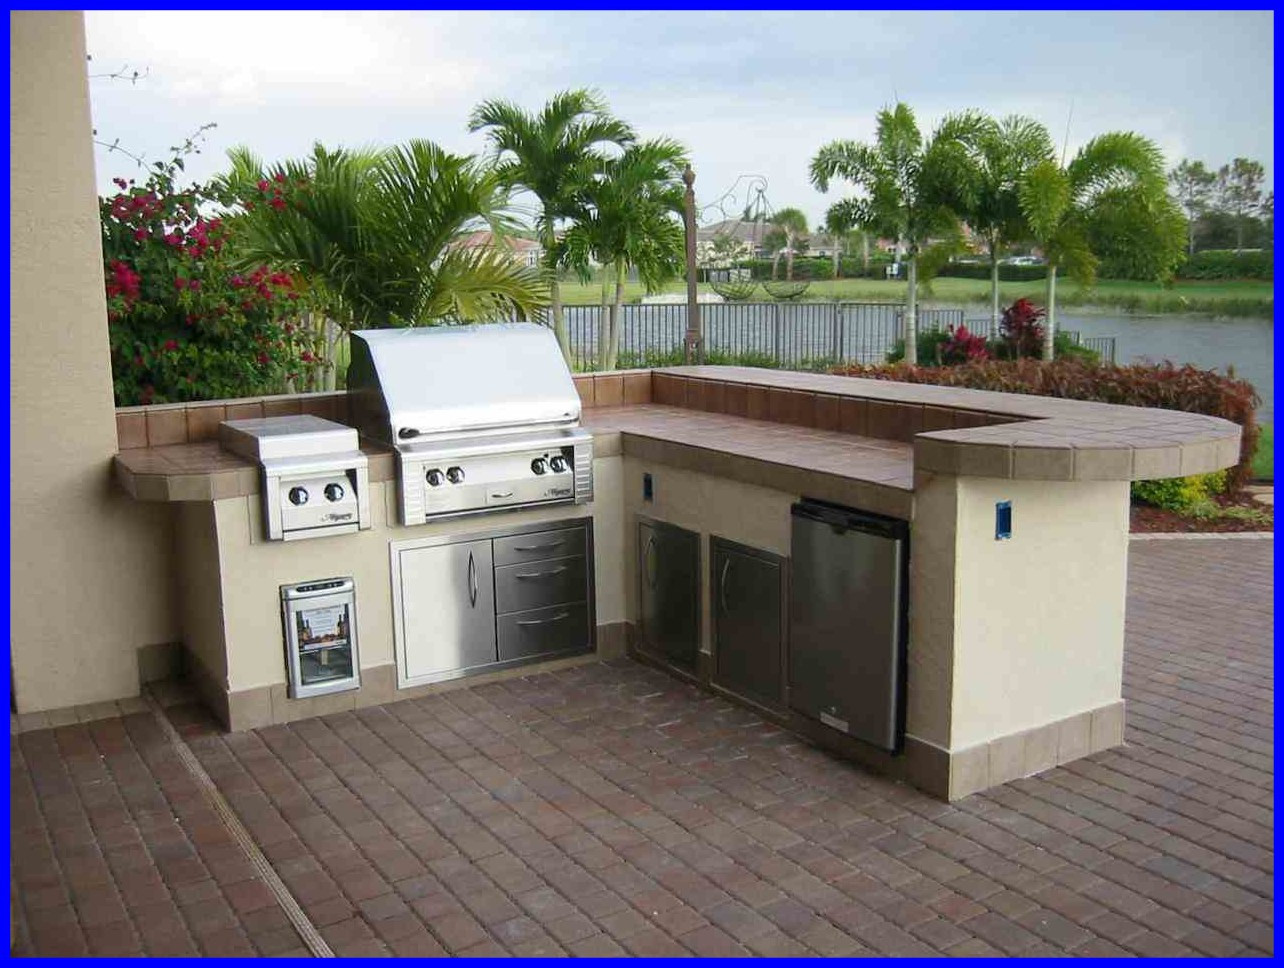 Outdoor Kitchen Kits Home Depot
 Prefab Outdoor Kitchens Costco